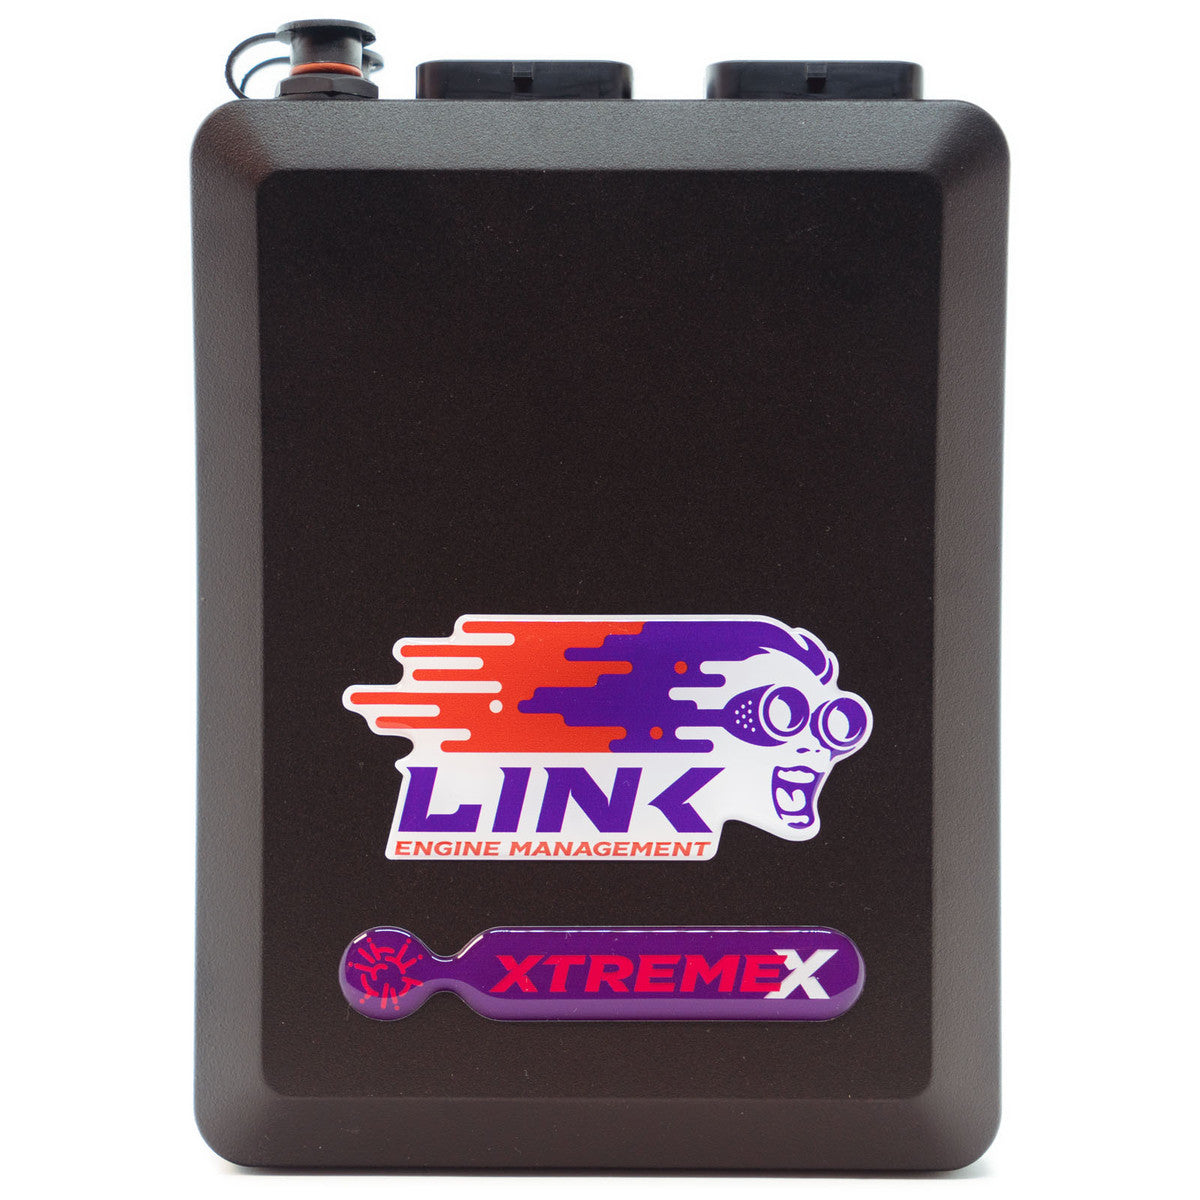 LINK ECU 109-4000 XtremeX 8 x fuel & ignition; 2 x knock; 1 x e-throttle; traction & cruise Photo-0 